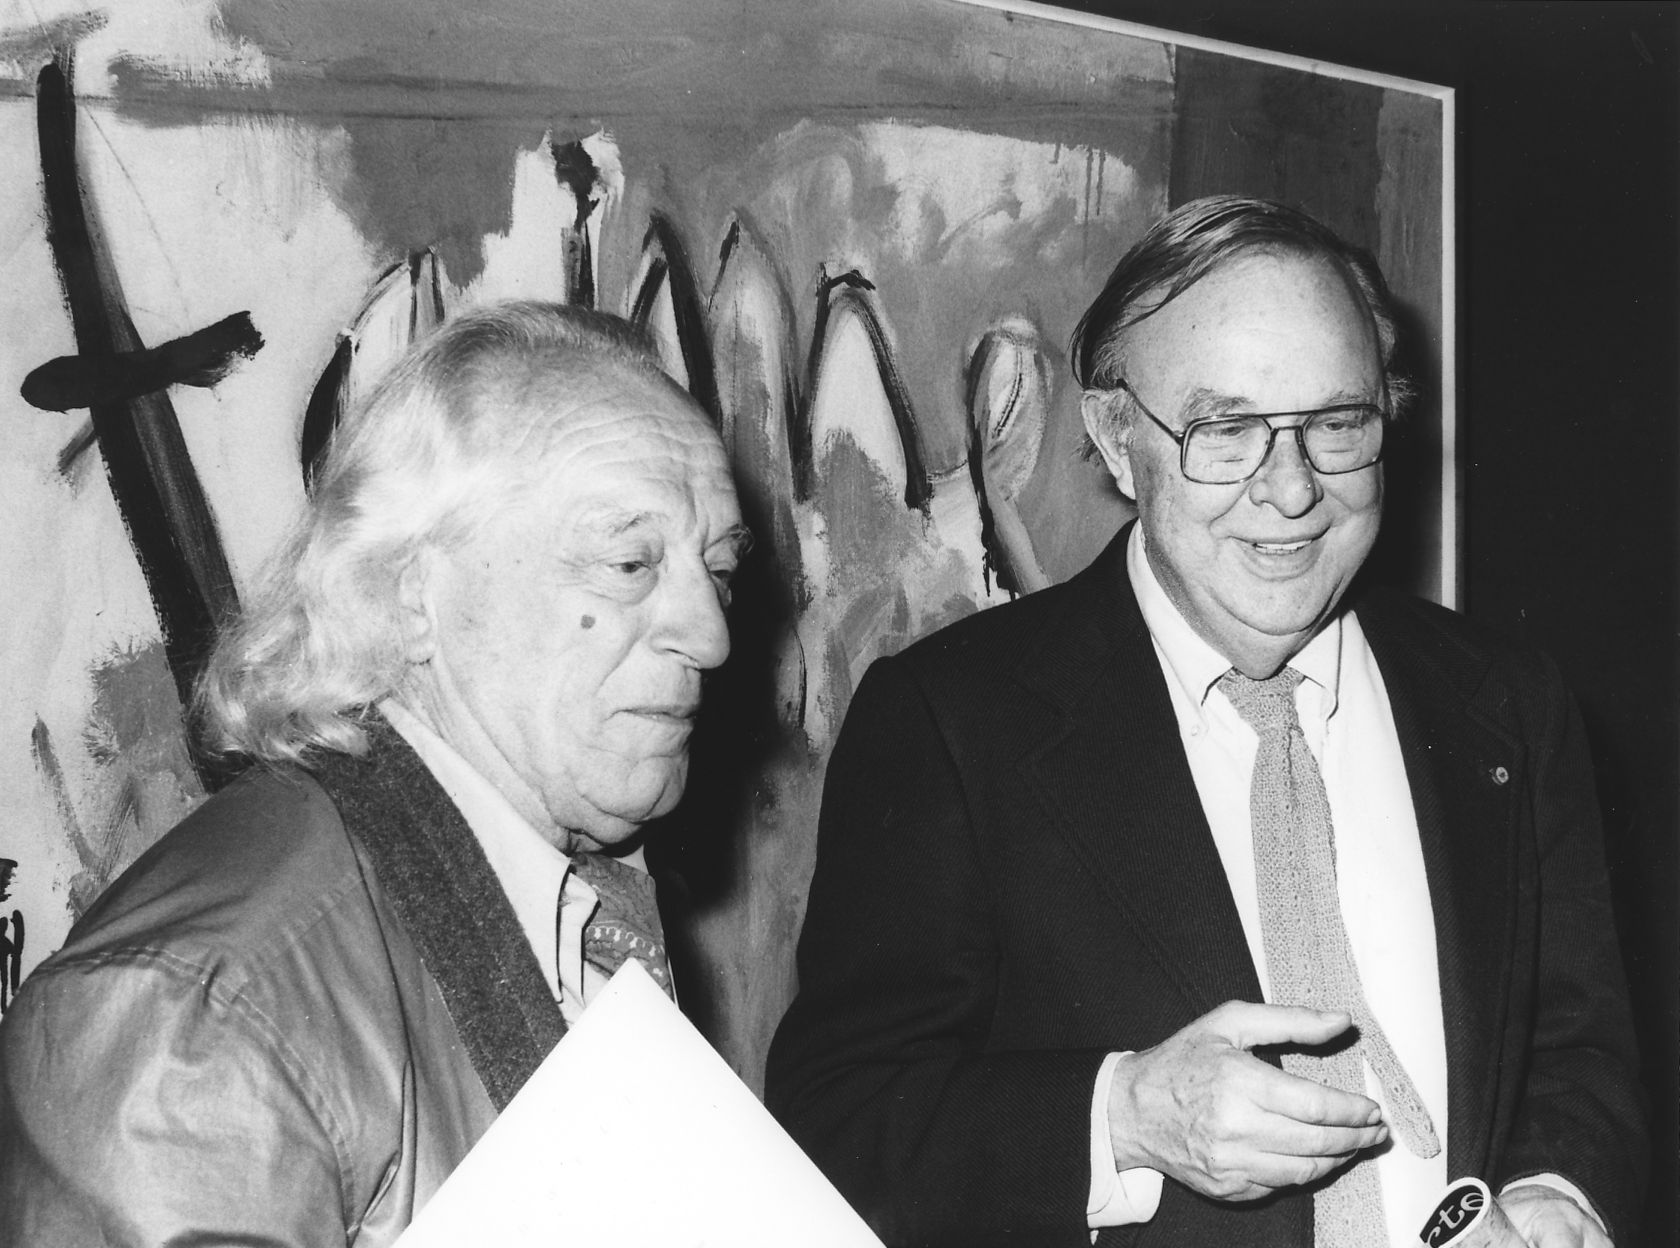 Motherwell and Rafael Alberti at Motherwell’s solo exhibition opening in Madrid, 1980